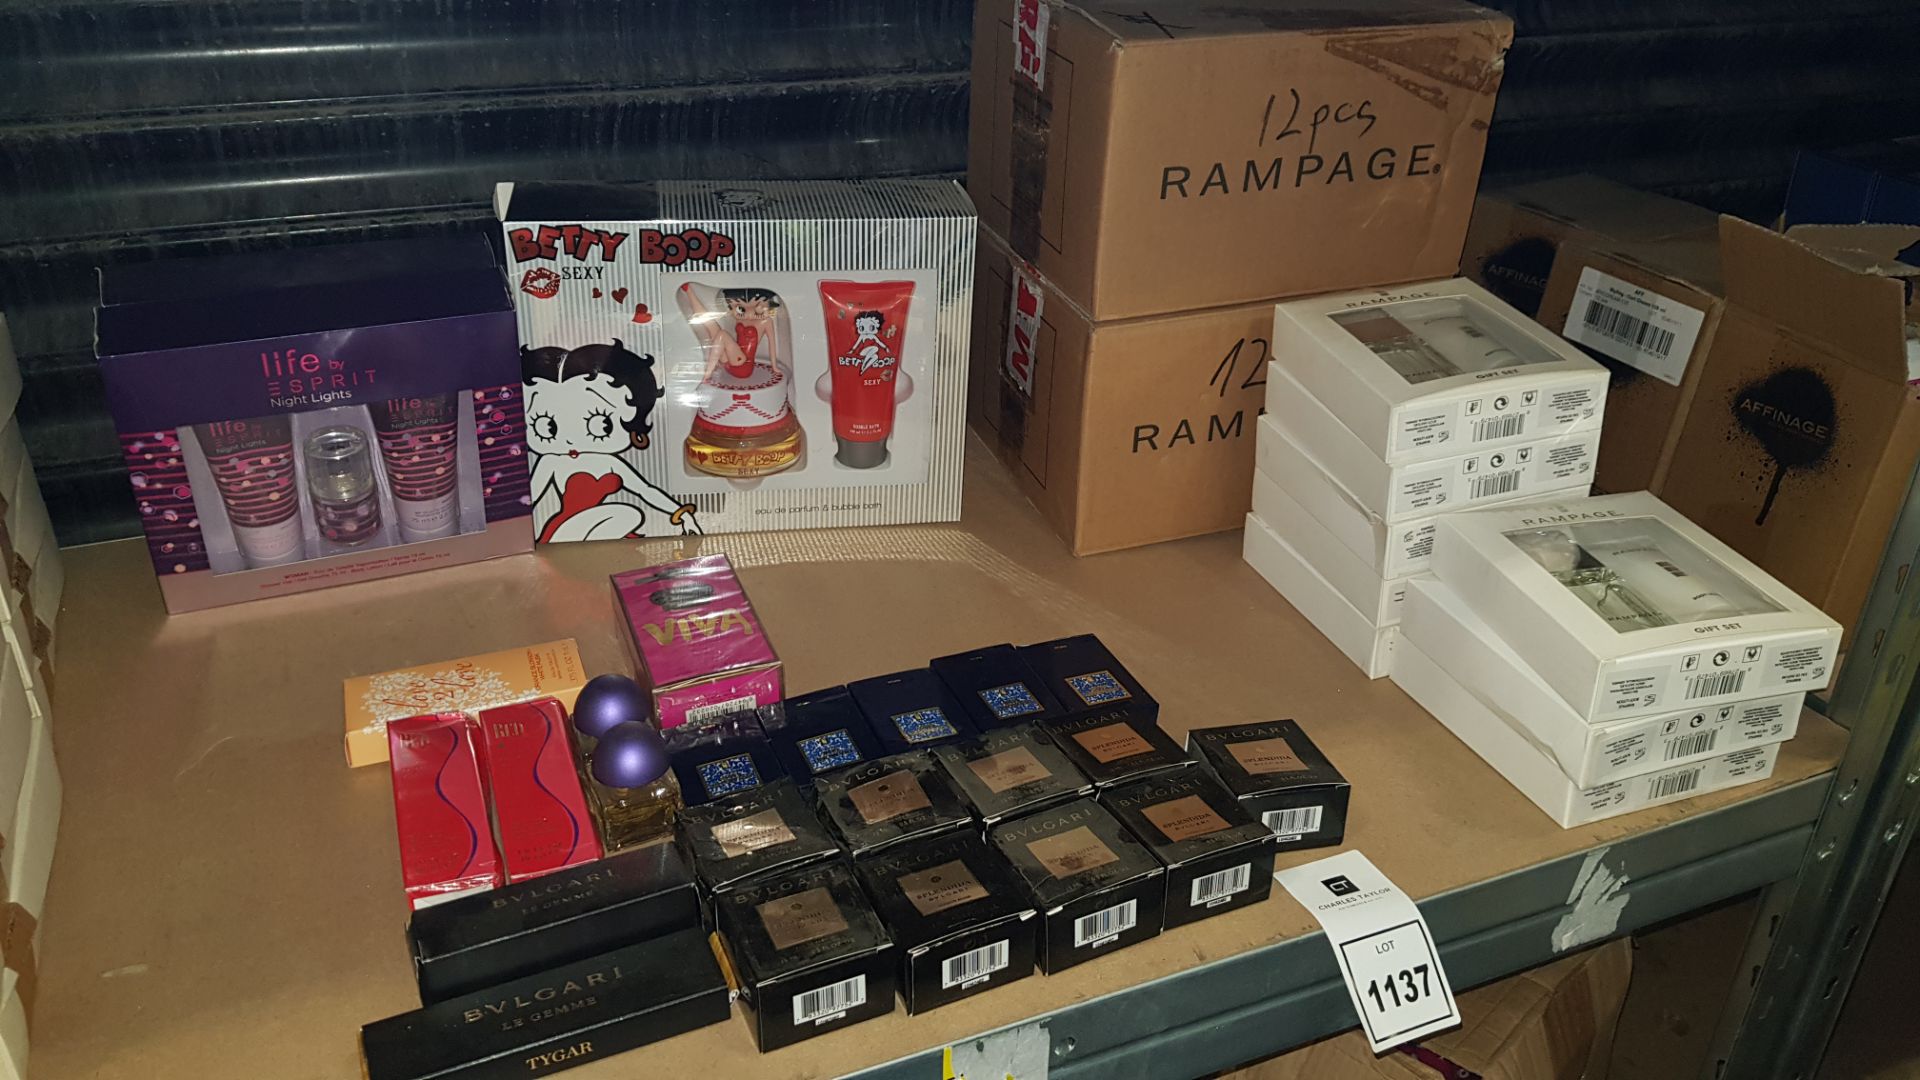 56 PIECE ASSORTED PERFUME LOT CONTAINING RAMPAGE GIFT SETS, BETTY BOOP GIFT SET, LIFE BY SPRIT